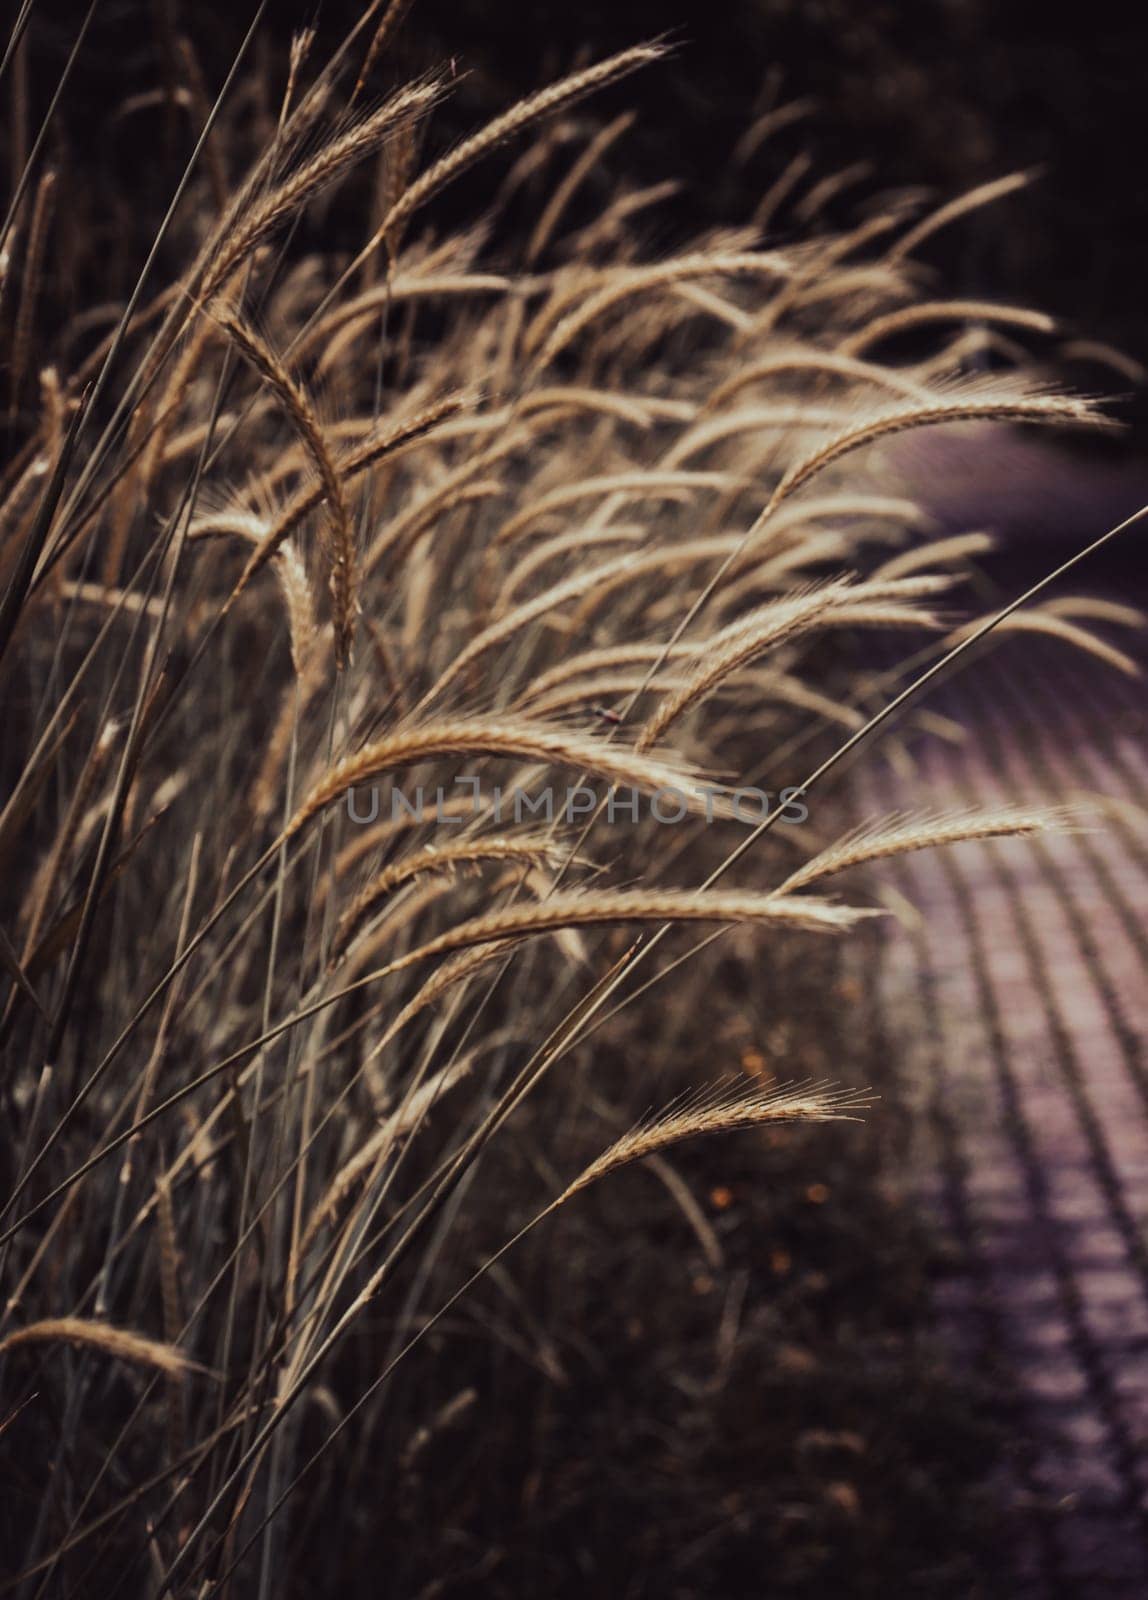 Wheat field - ears of golden wheat close-up photo. by _Nataly_Nati_